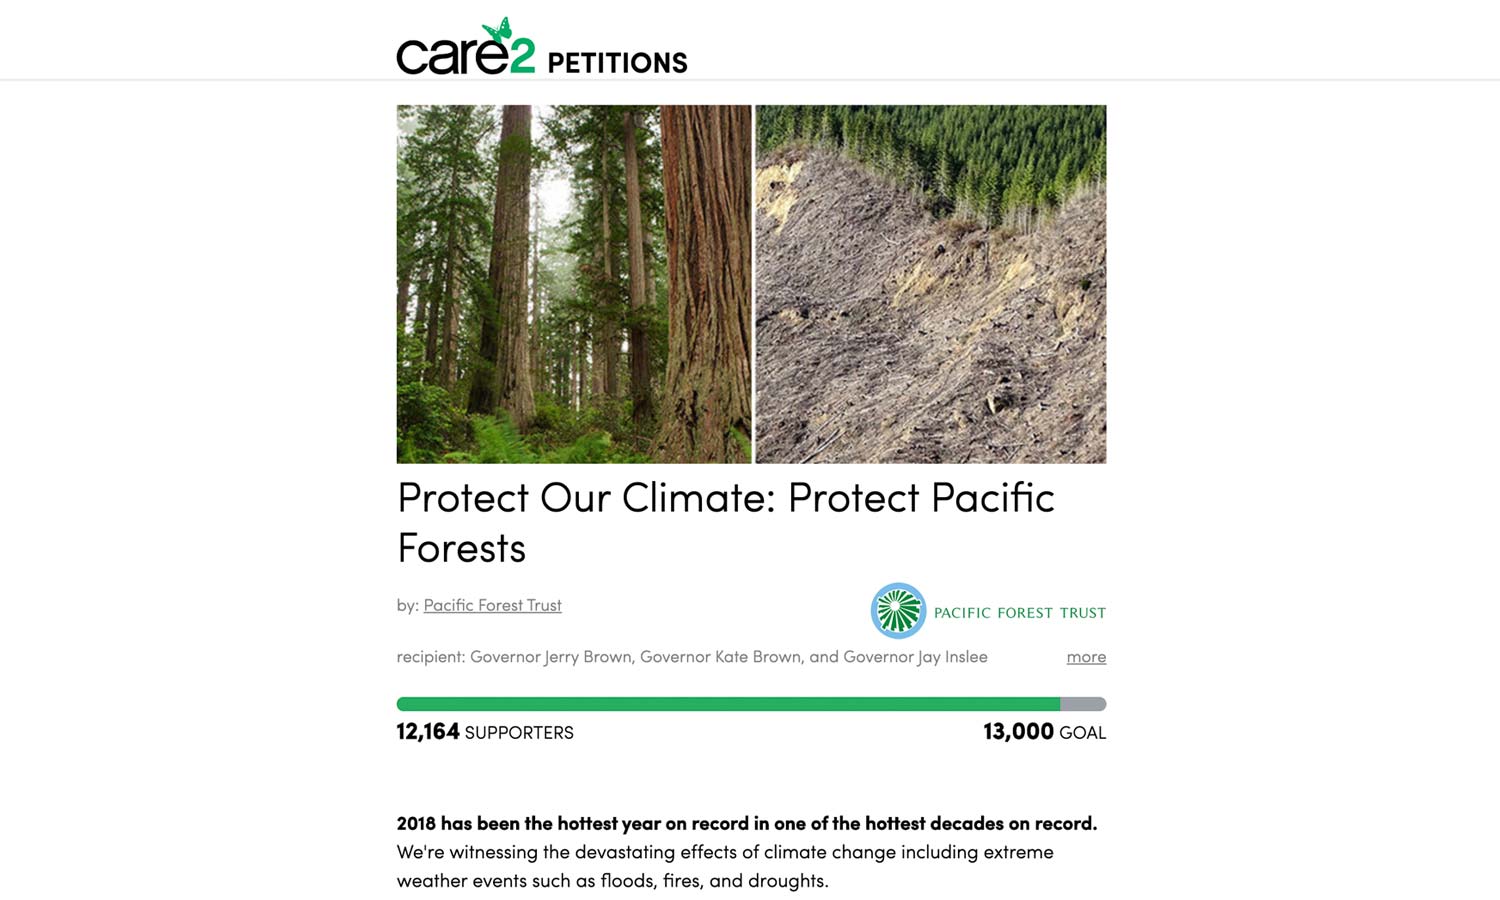 Image of Care2 petition for Pacific Forest Trust